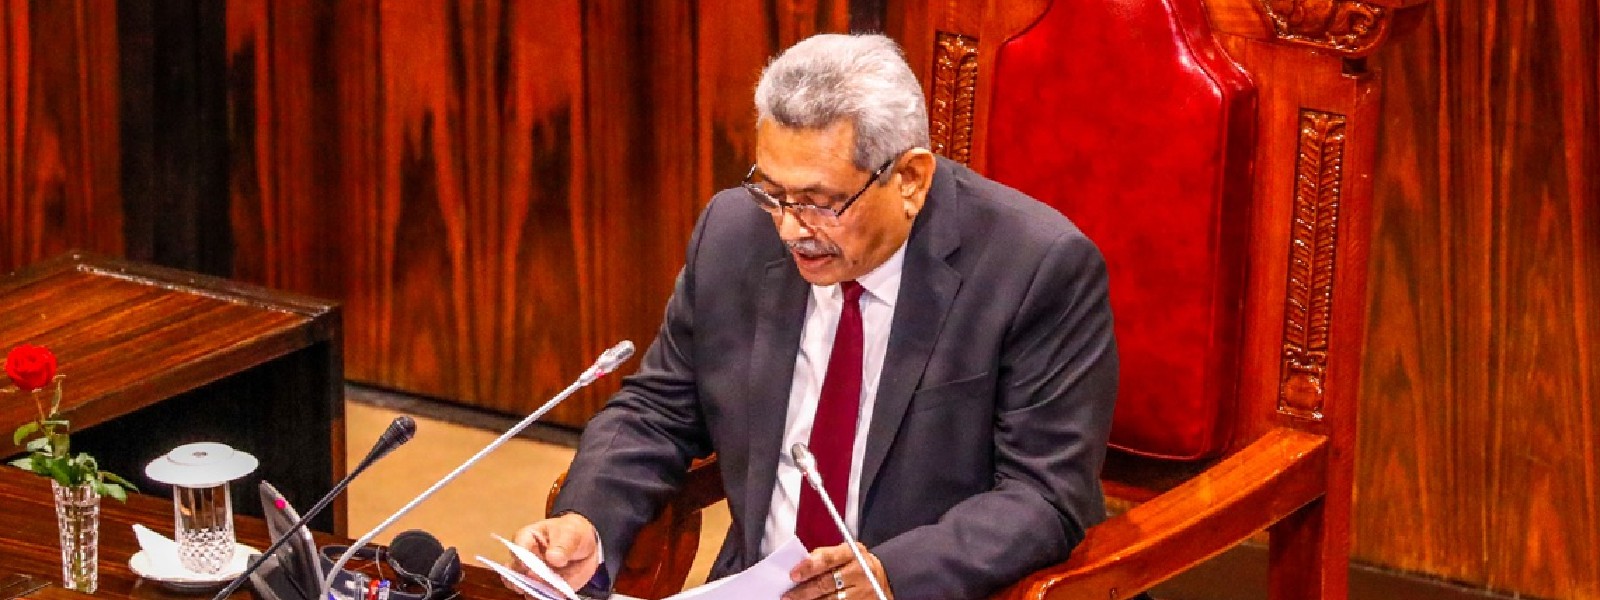 Sri Lankan President declares Public Emergency with effect from 1st April